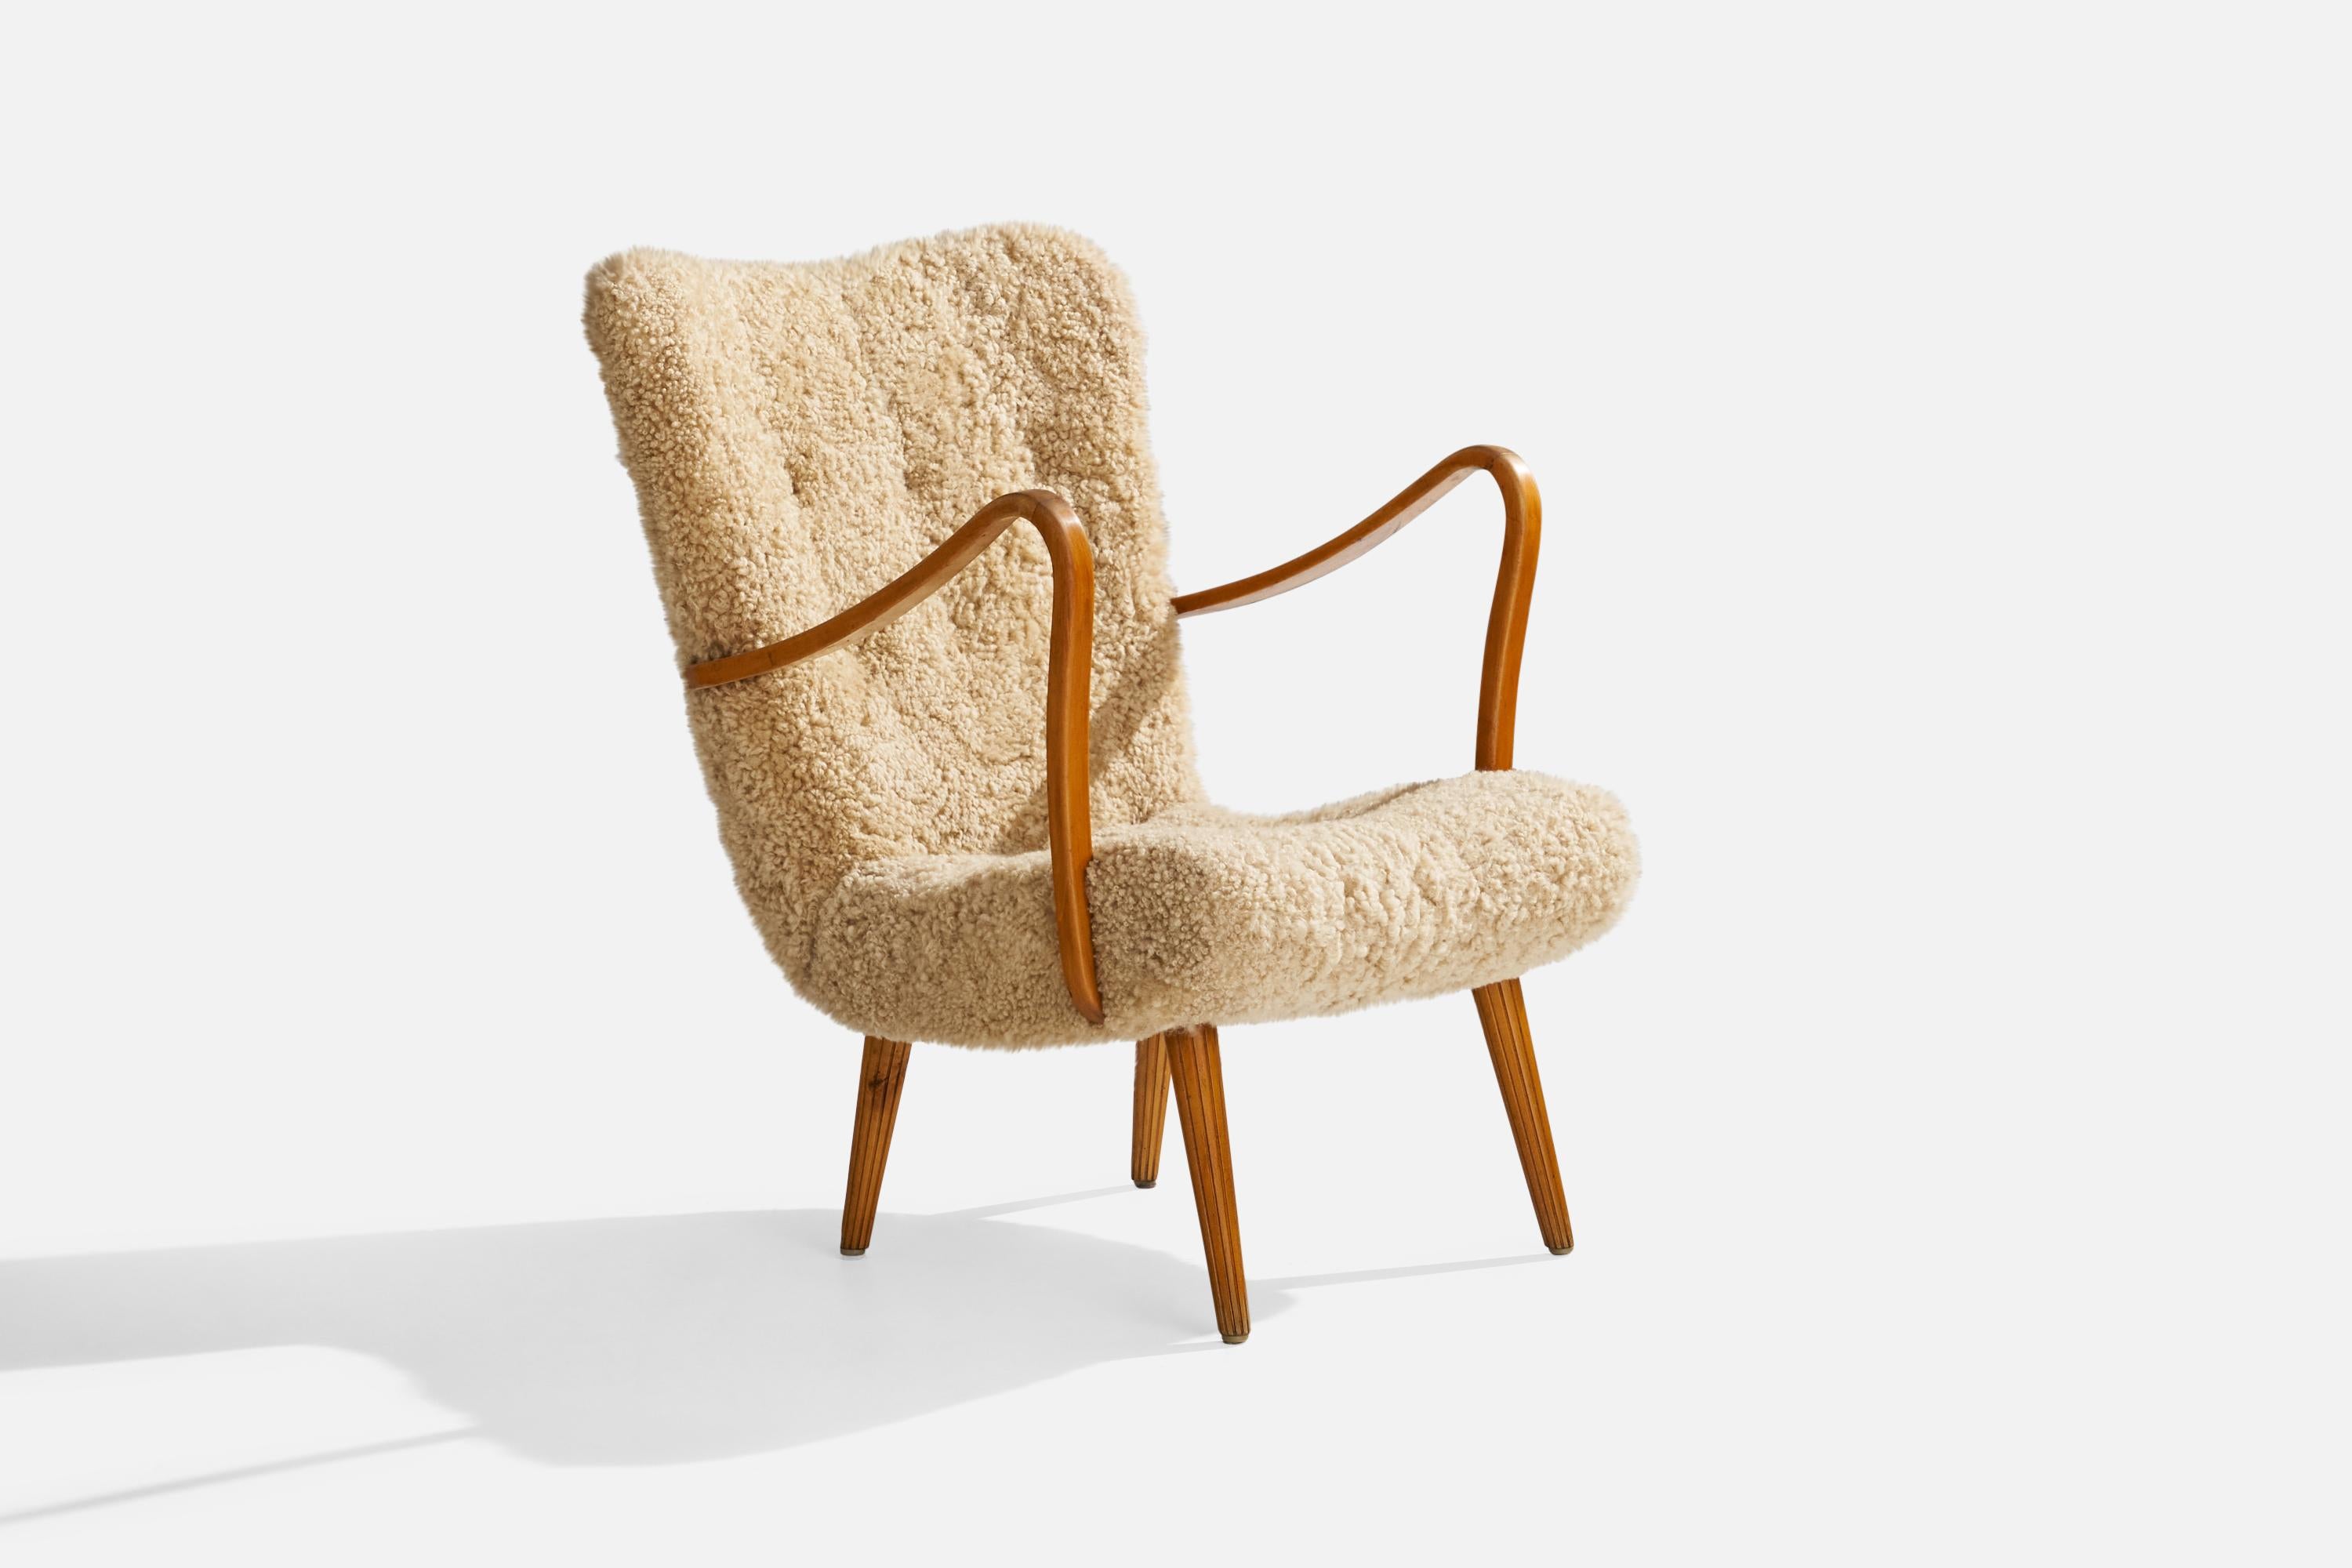 A wood and shearling lounge chair attributed to Carl Gustaf Hiort af Ornäs, Finland, 1950s.

For reference study model 